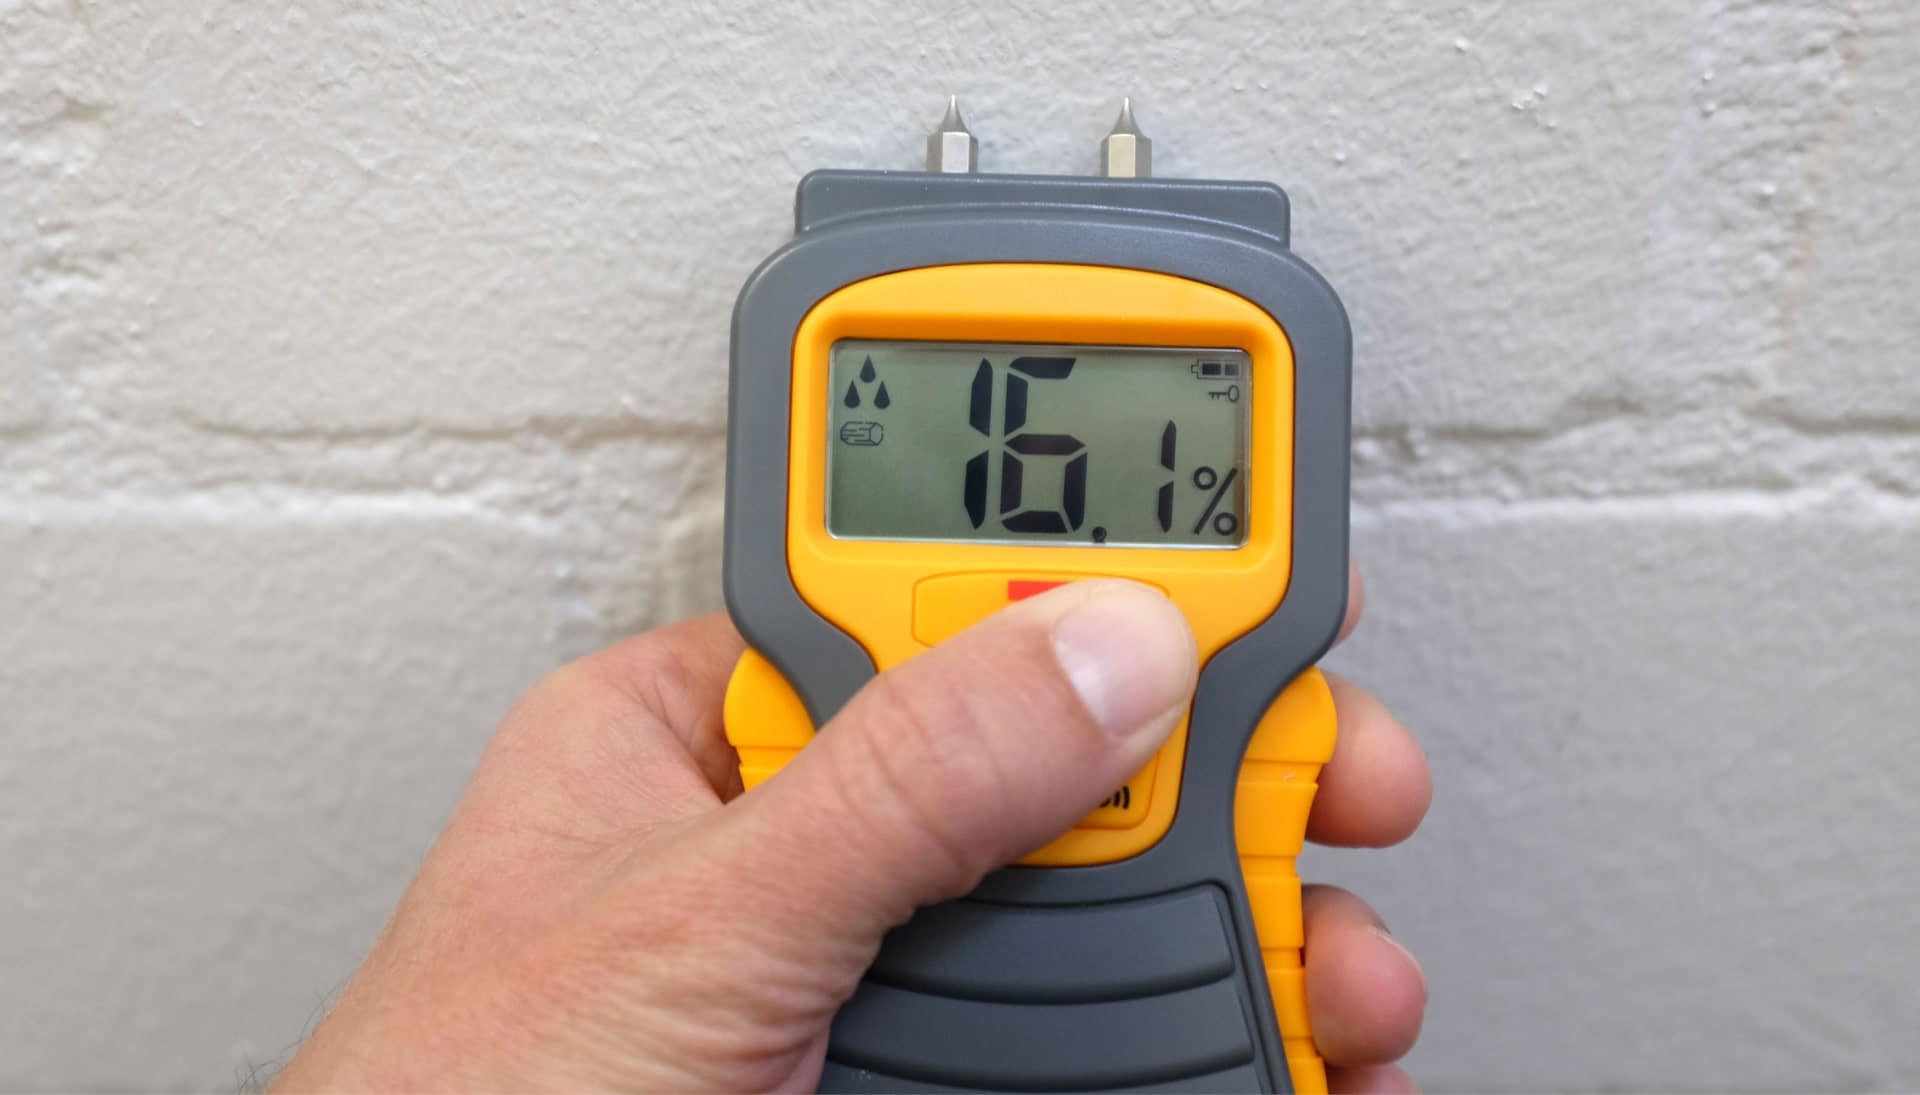 We provide fast, accurate, and affordable mold testing services in Greenville, South Carolina.